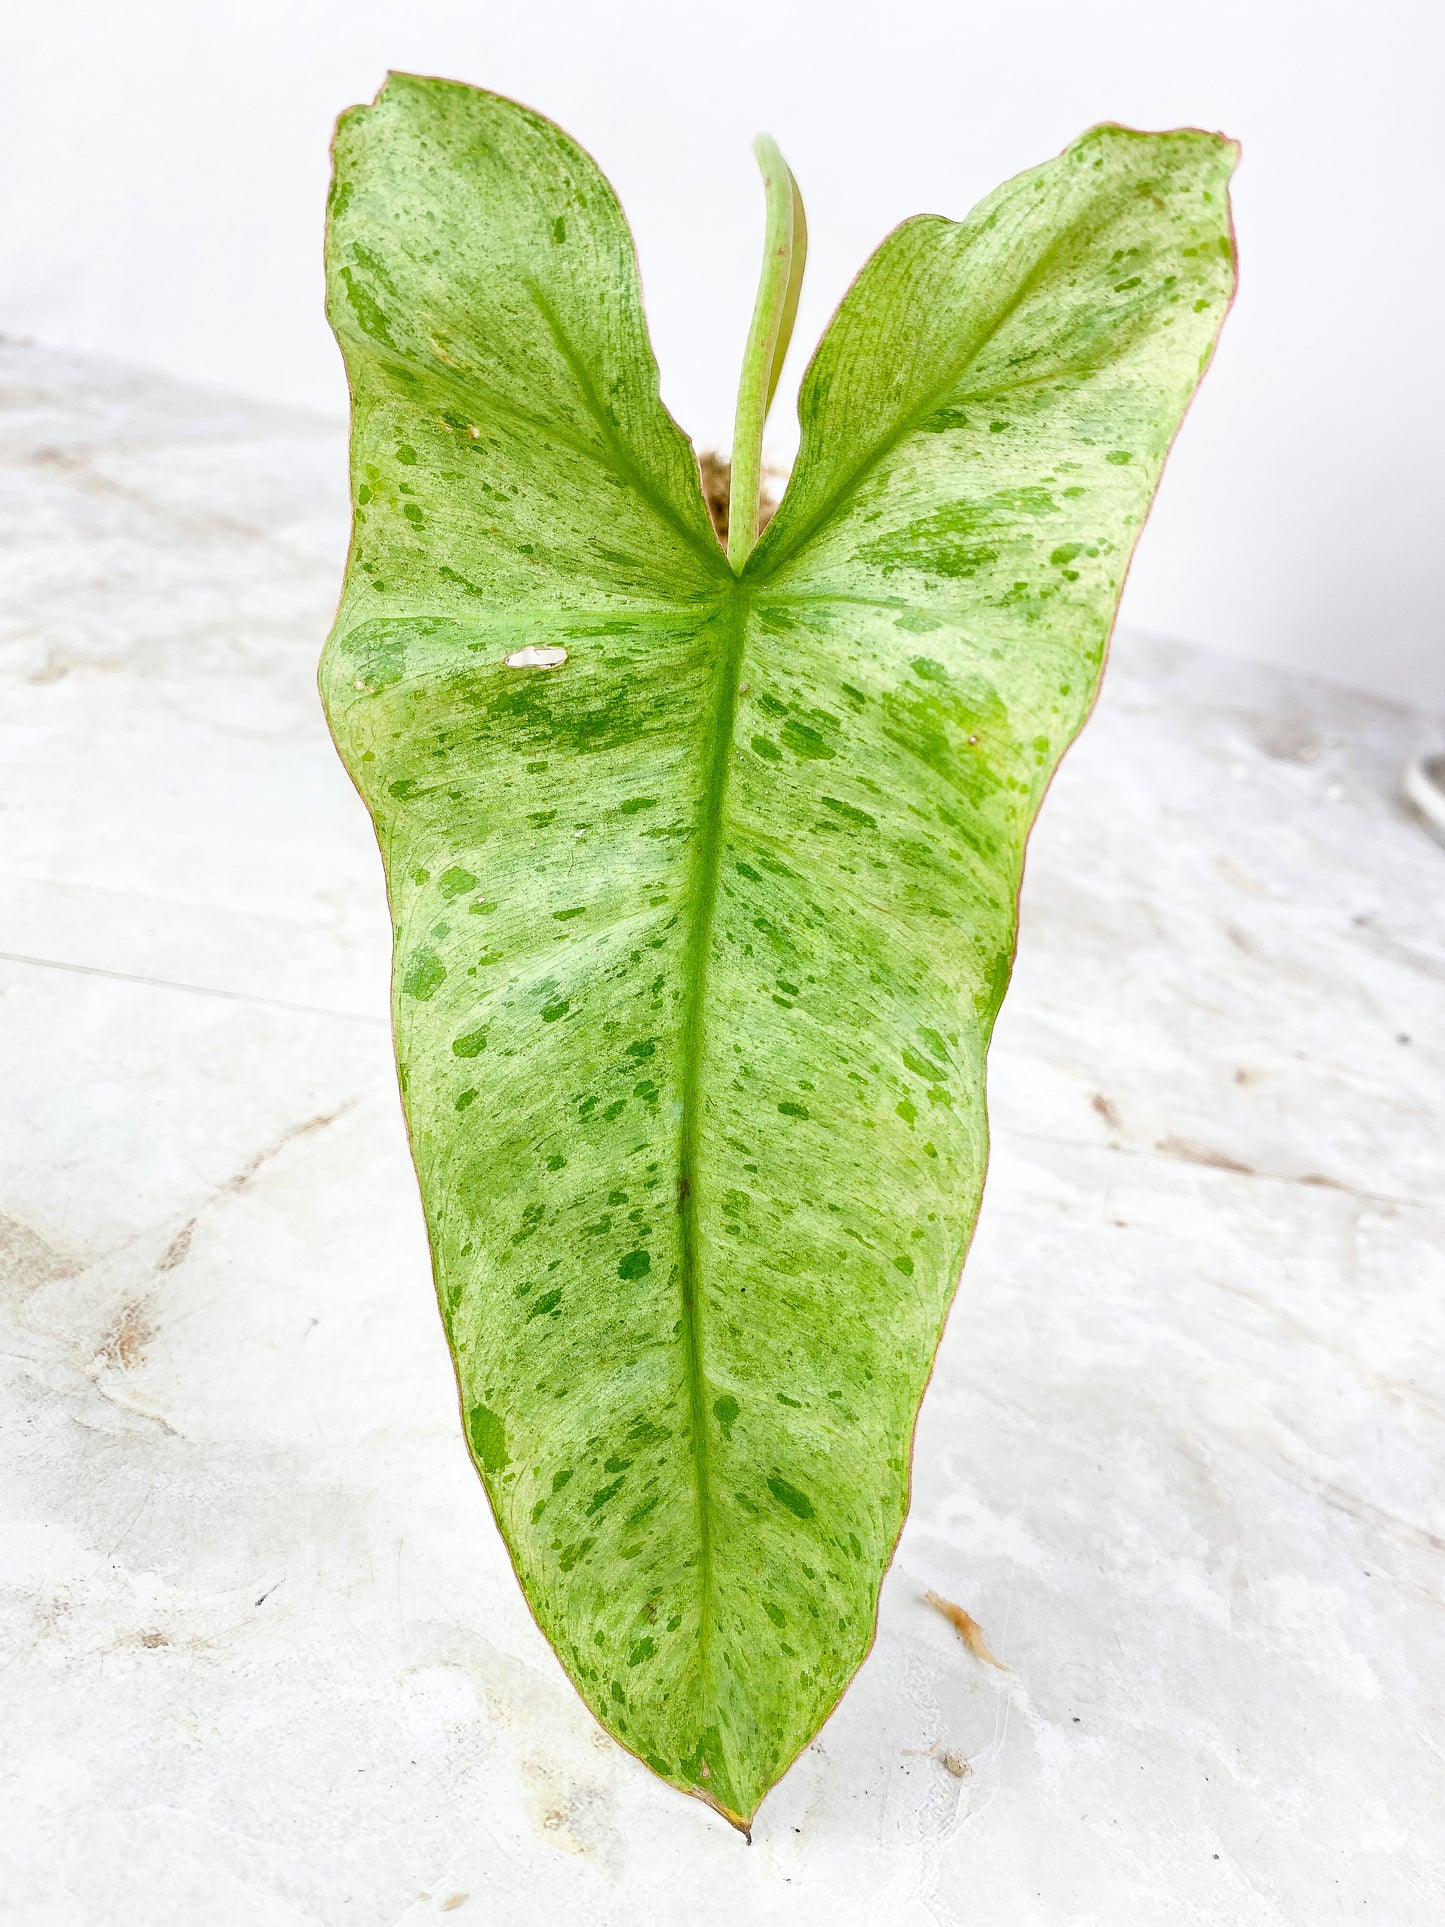 Philodendron paraiso verde highly variegated. Rooted 1 leaf